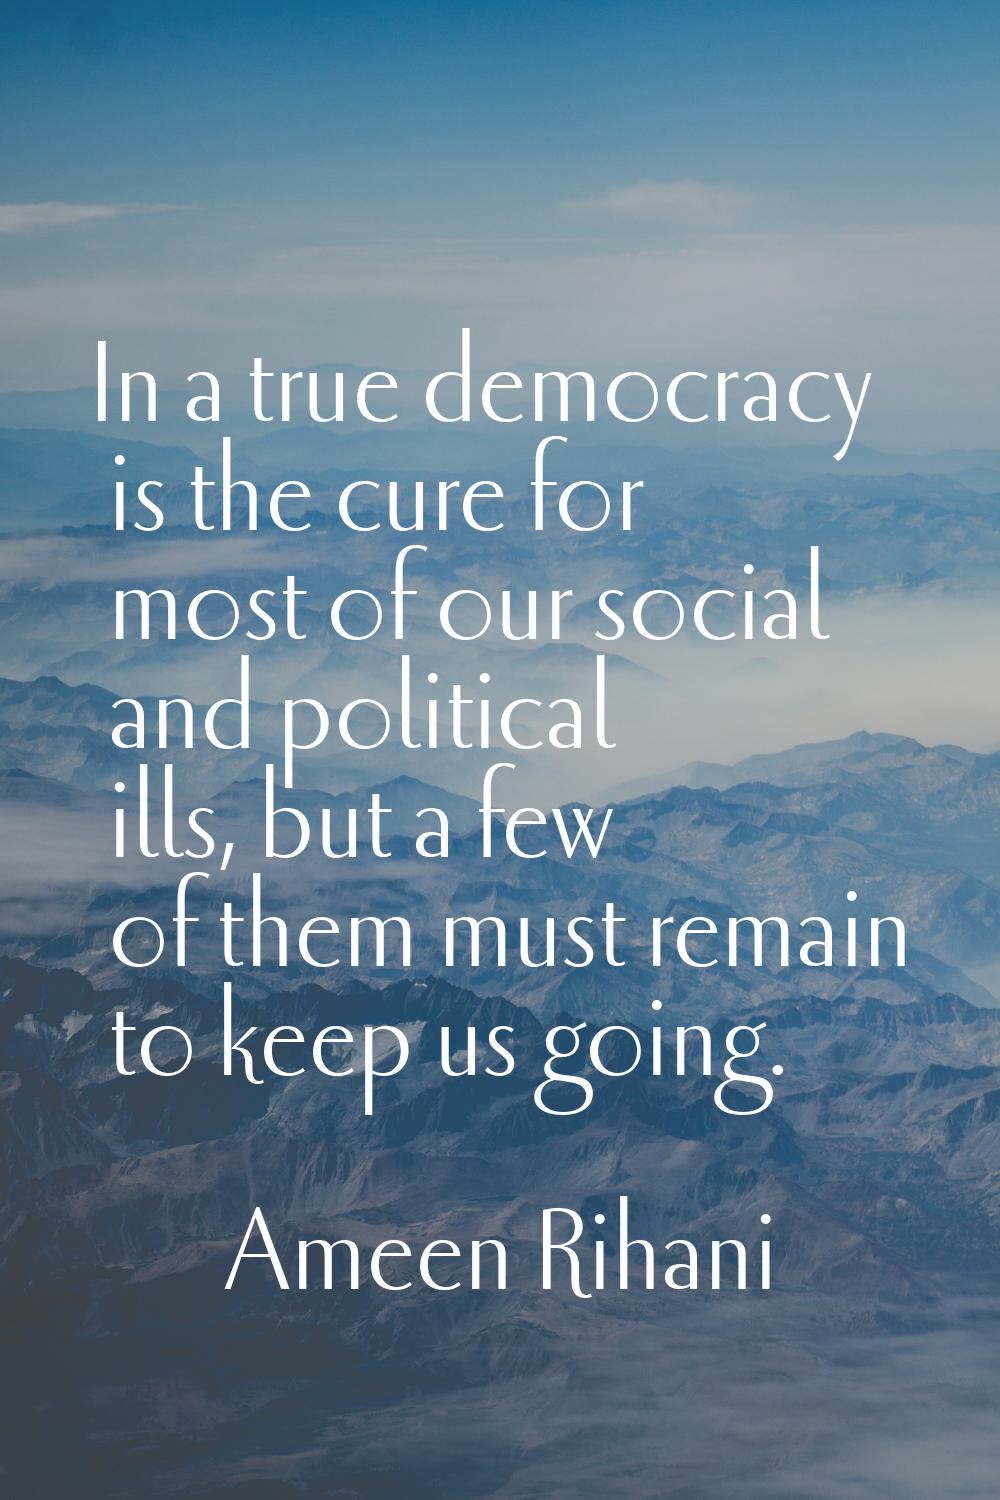 In a true democracy is the cure for most of our social and political ills, but a few of them must r